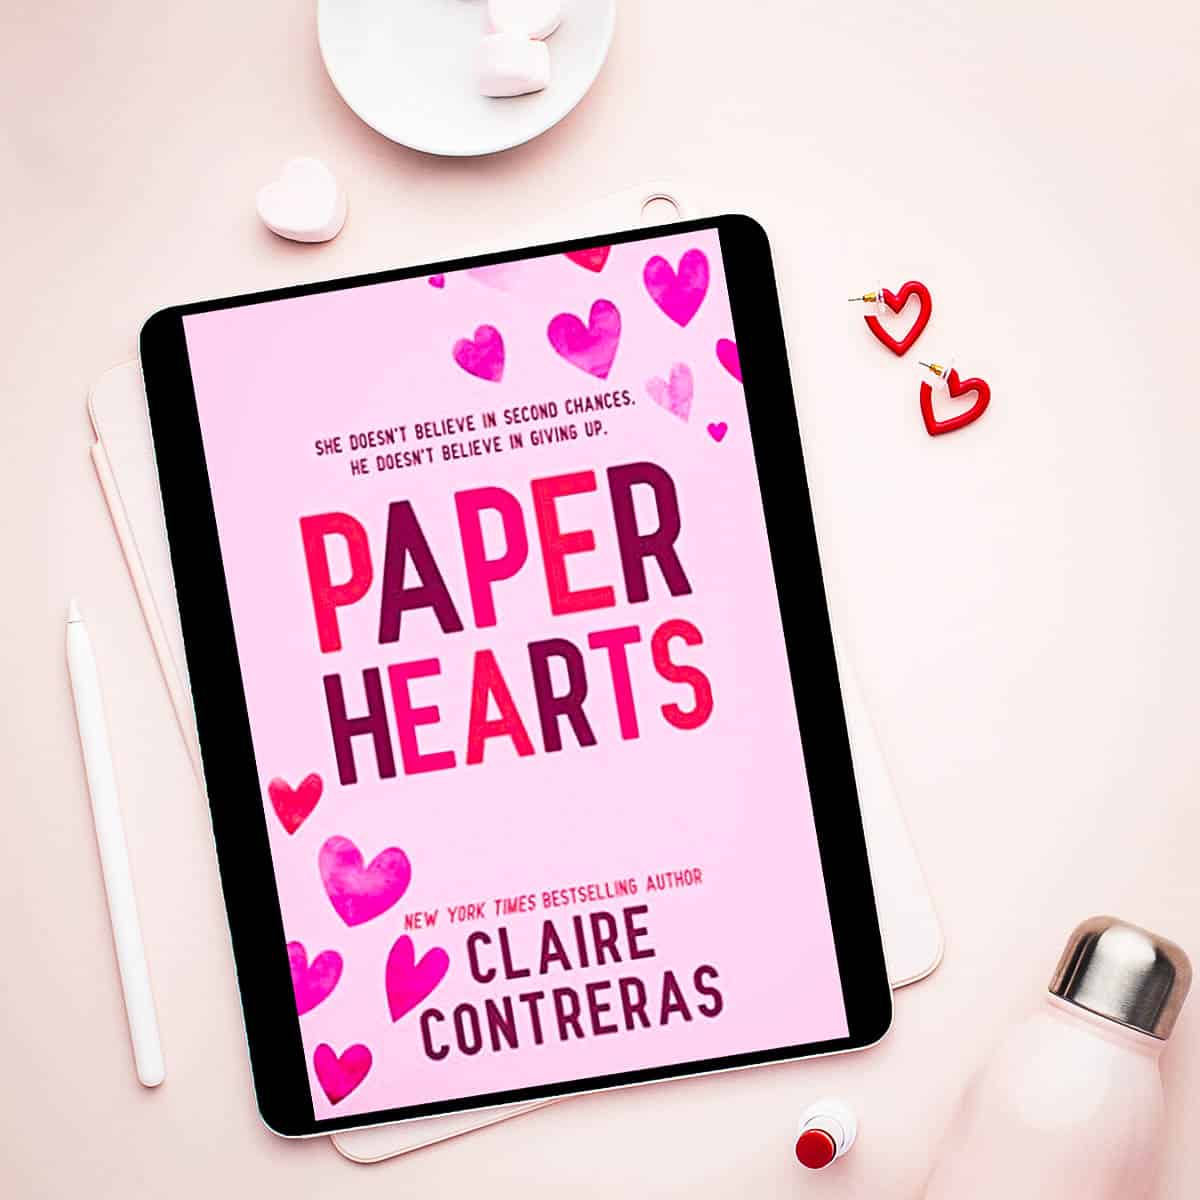 Read Chapter 1 of Paper Hearts by Claire Contreras!